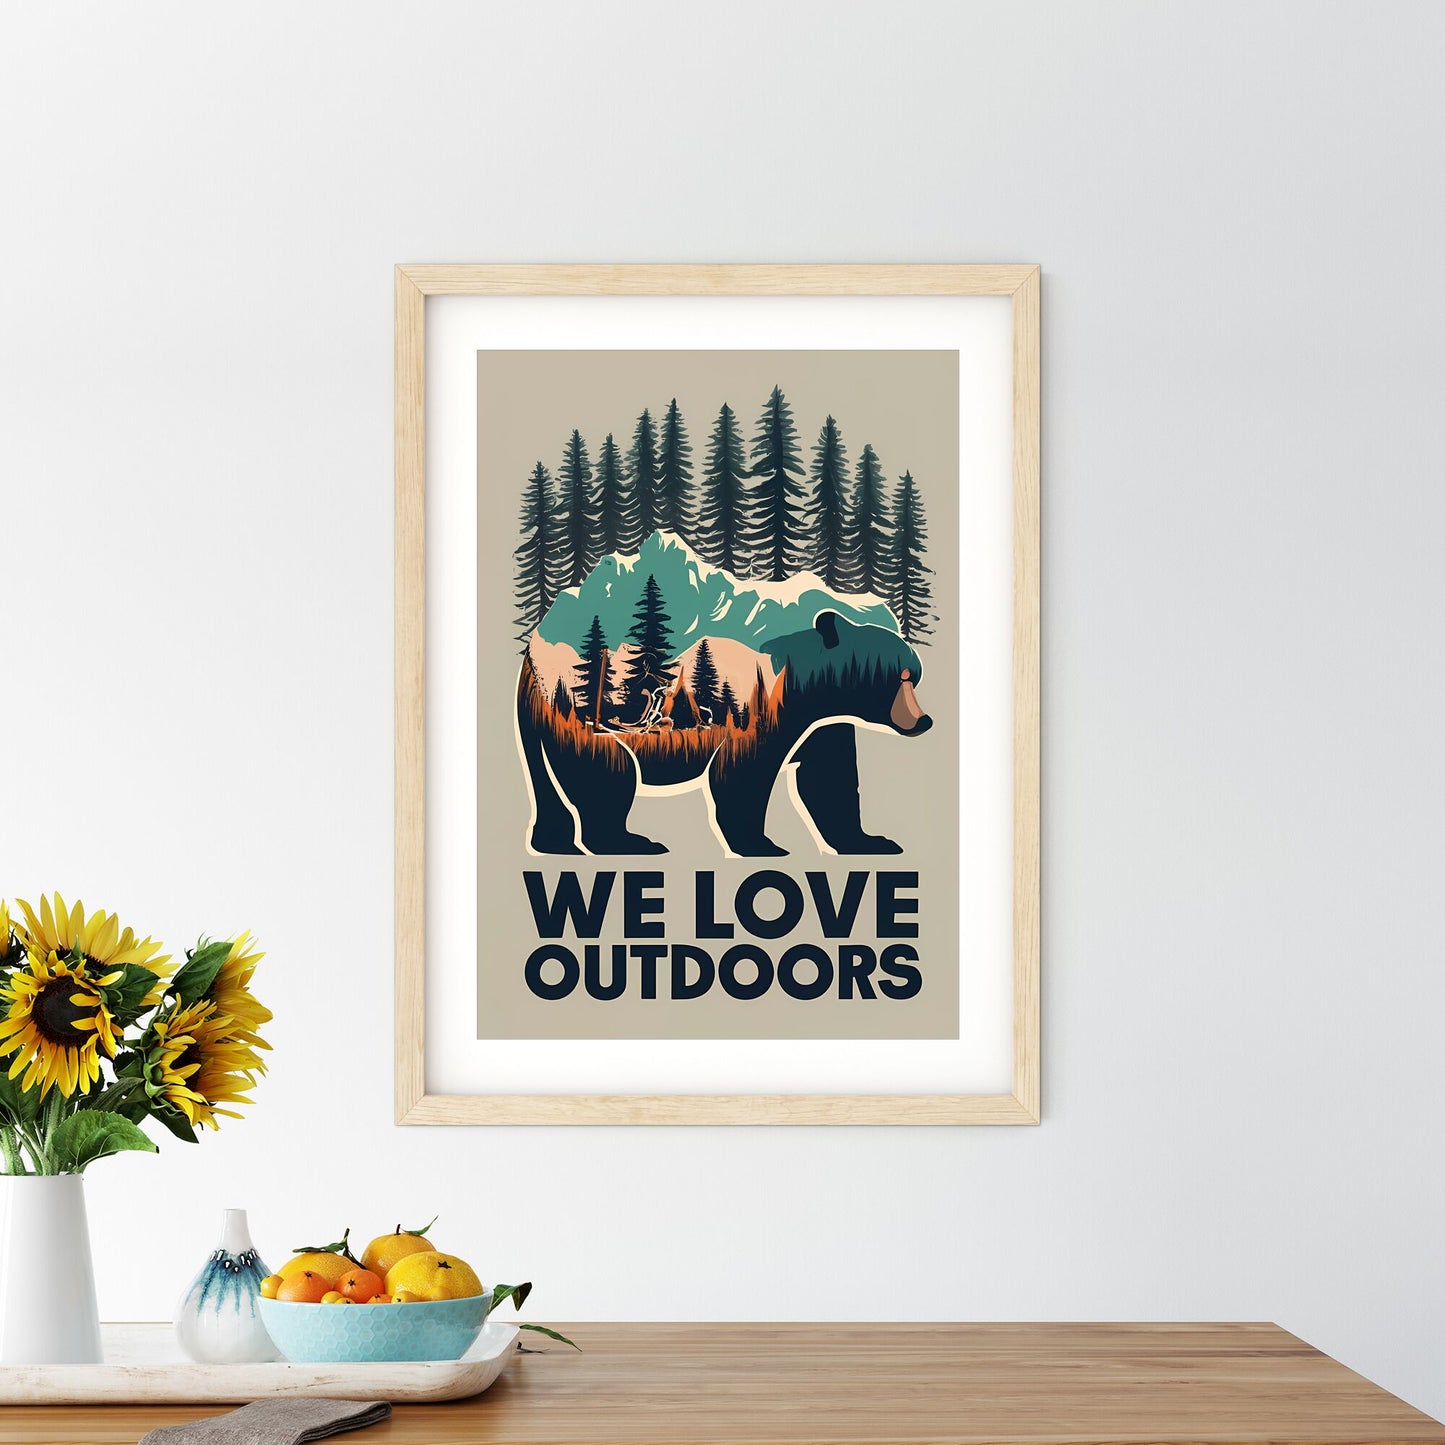 We Love Outdoors - A Bear With Trees And Mountains Art Print Default Title